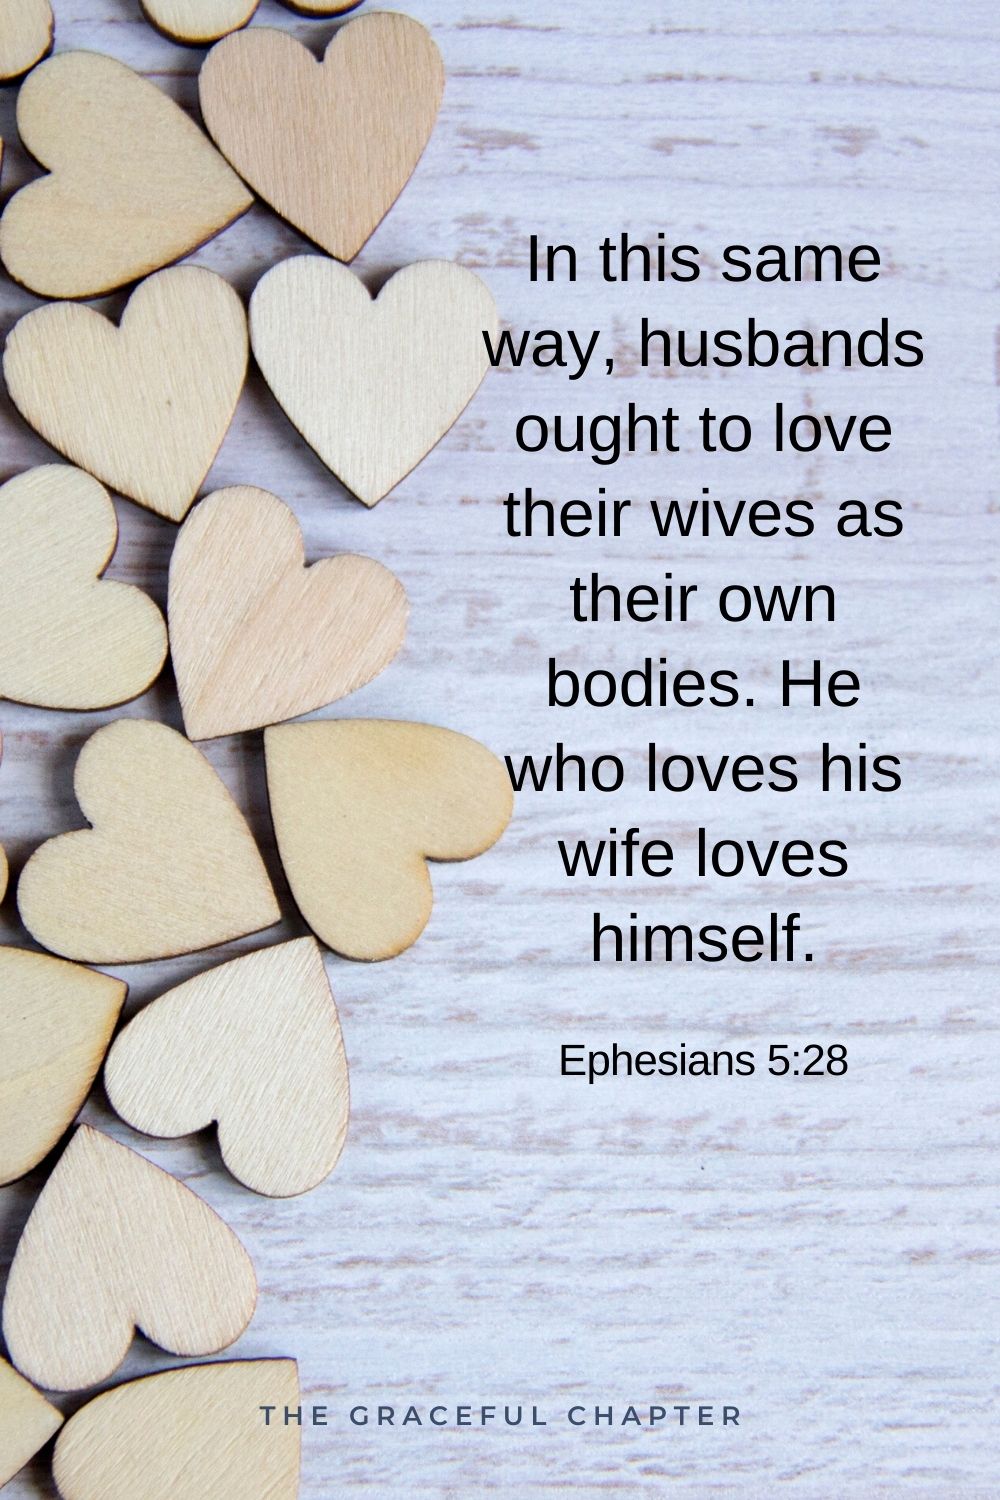 In this same way, husbands ought to love their wives as their own bodies. He who loves his wife loves himself. Ephesians 5:28